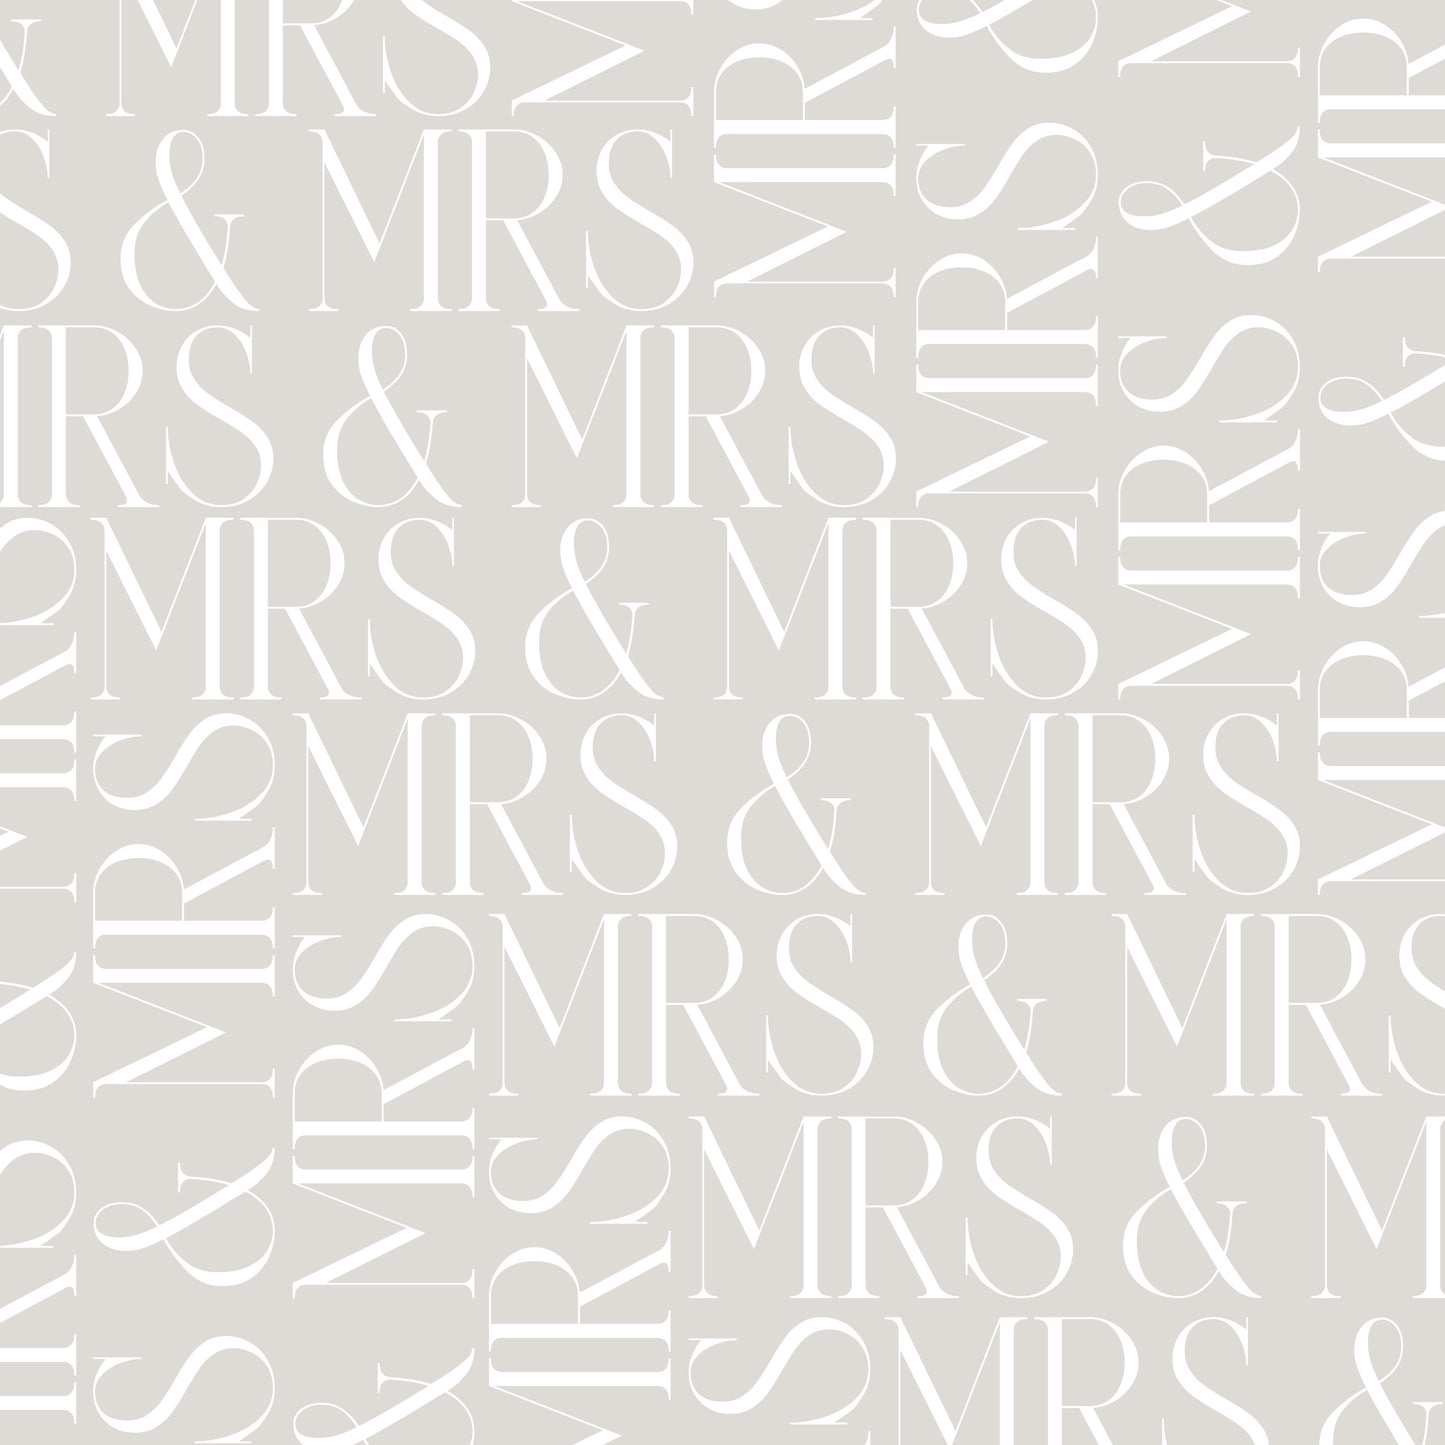 Mrs & Mrs Wrapping Paper Sheets